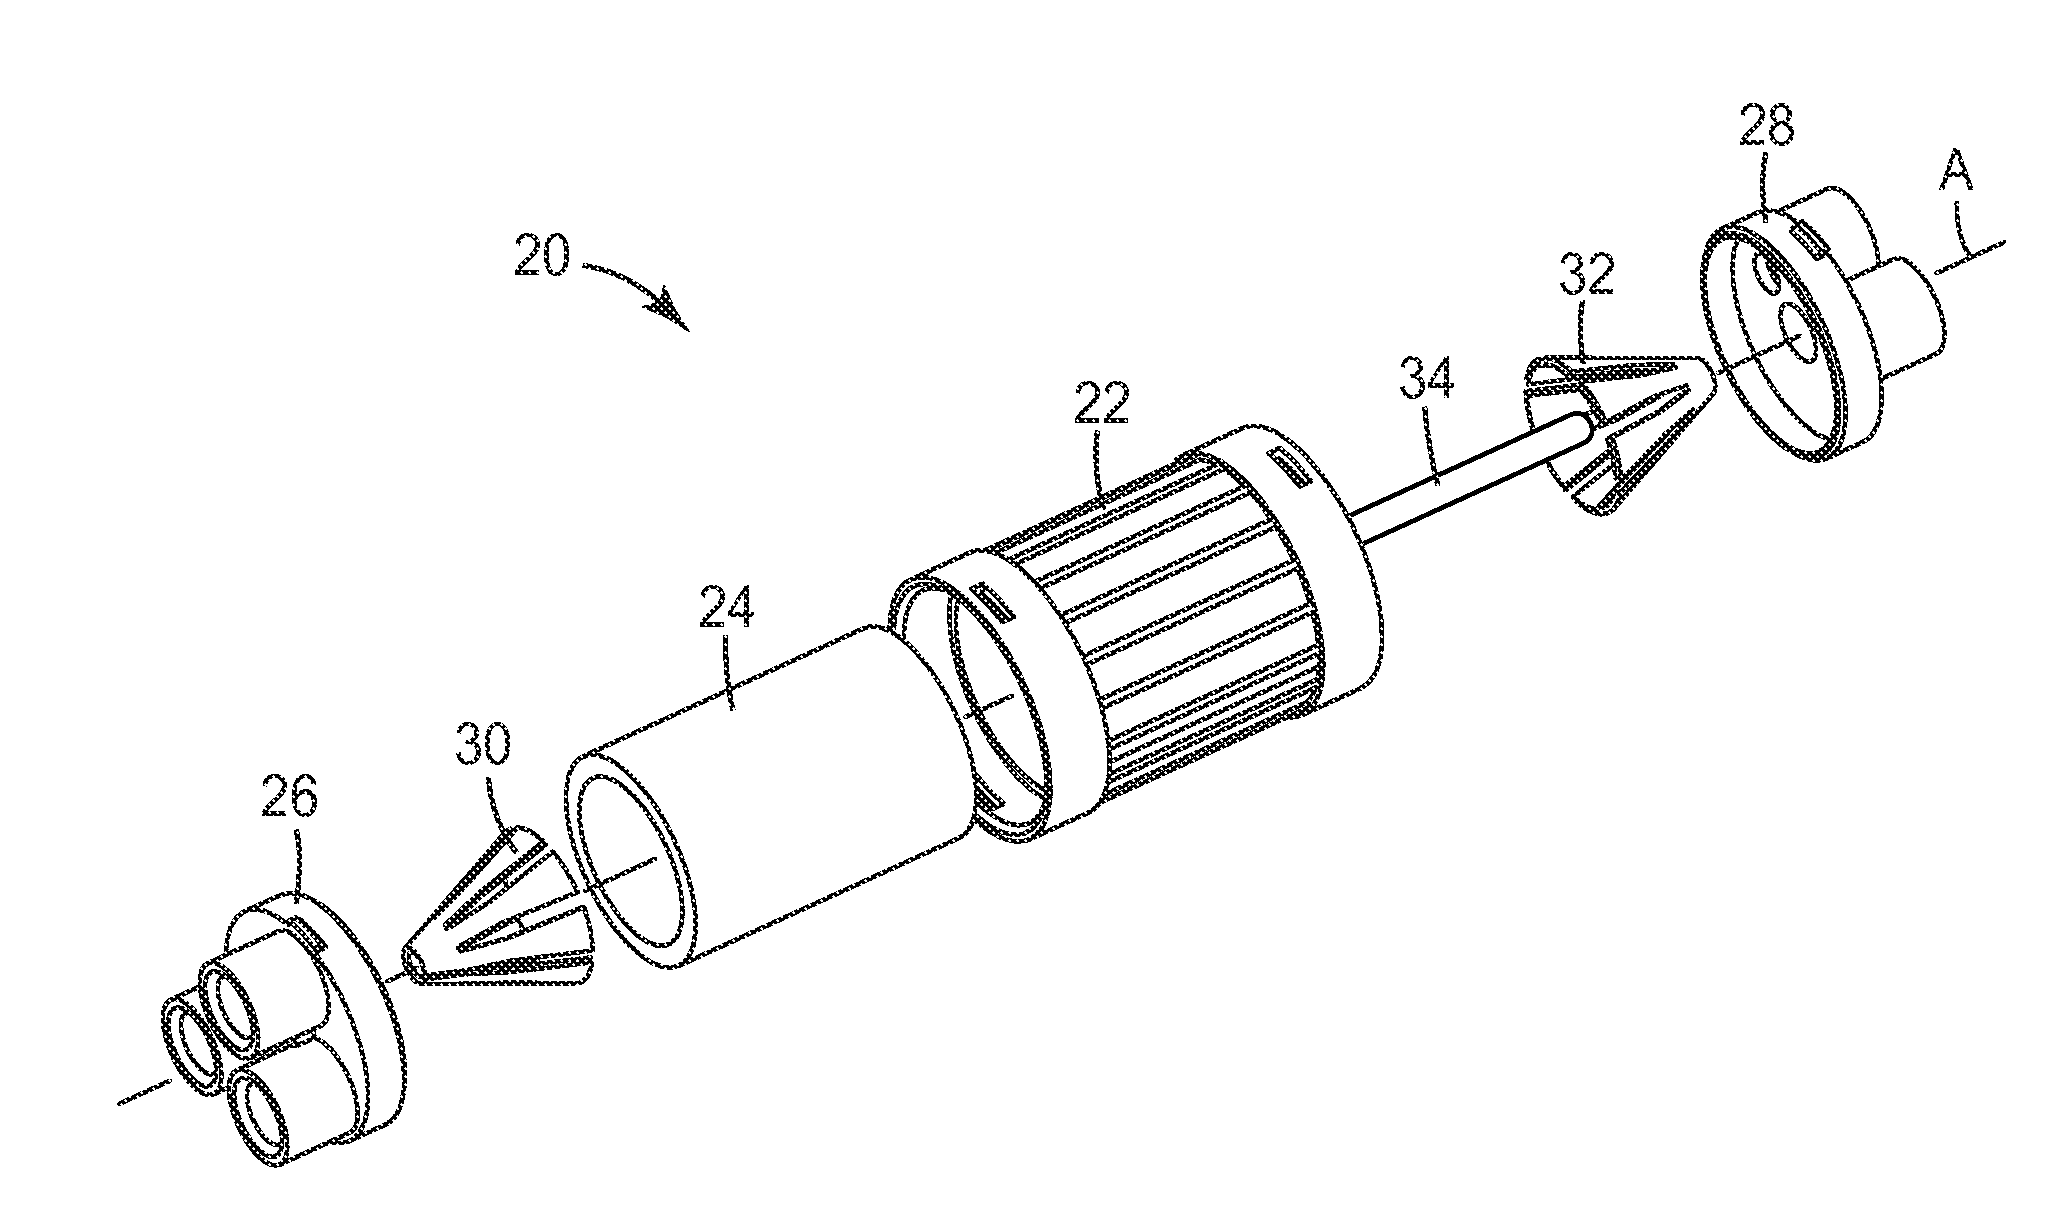 Electrical splice connector